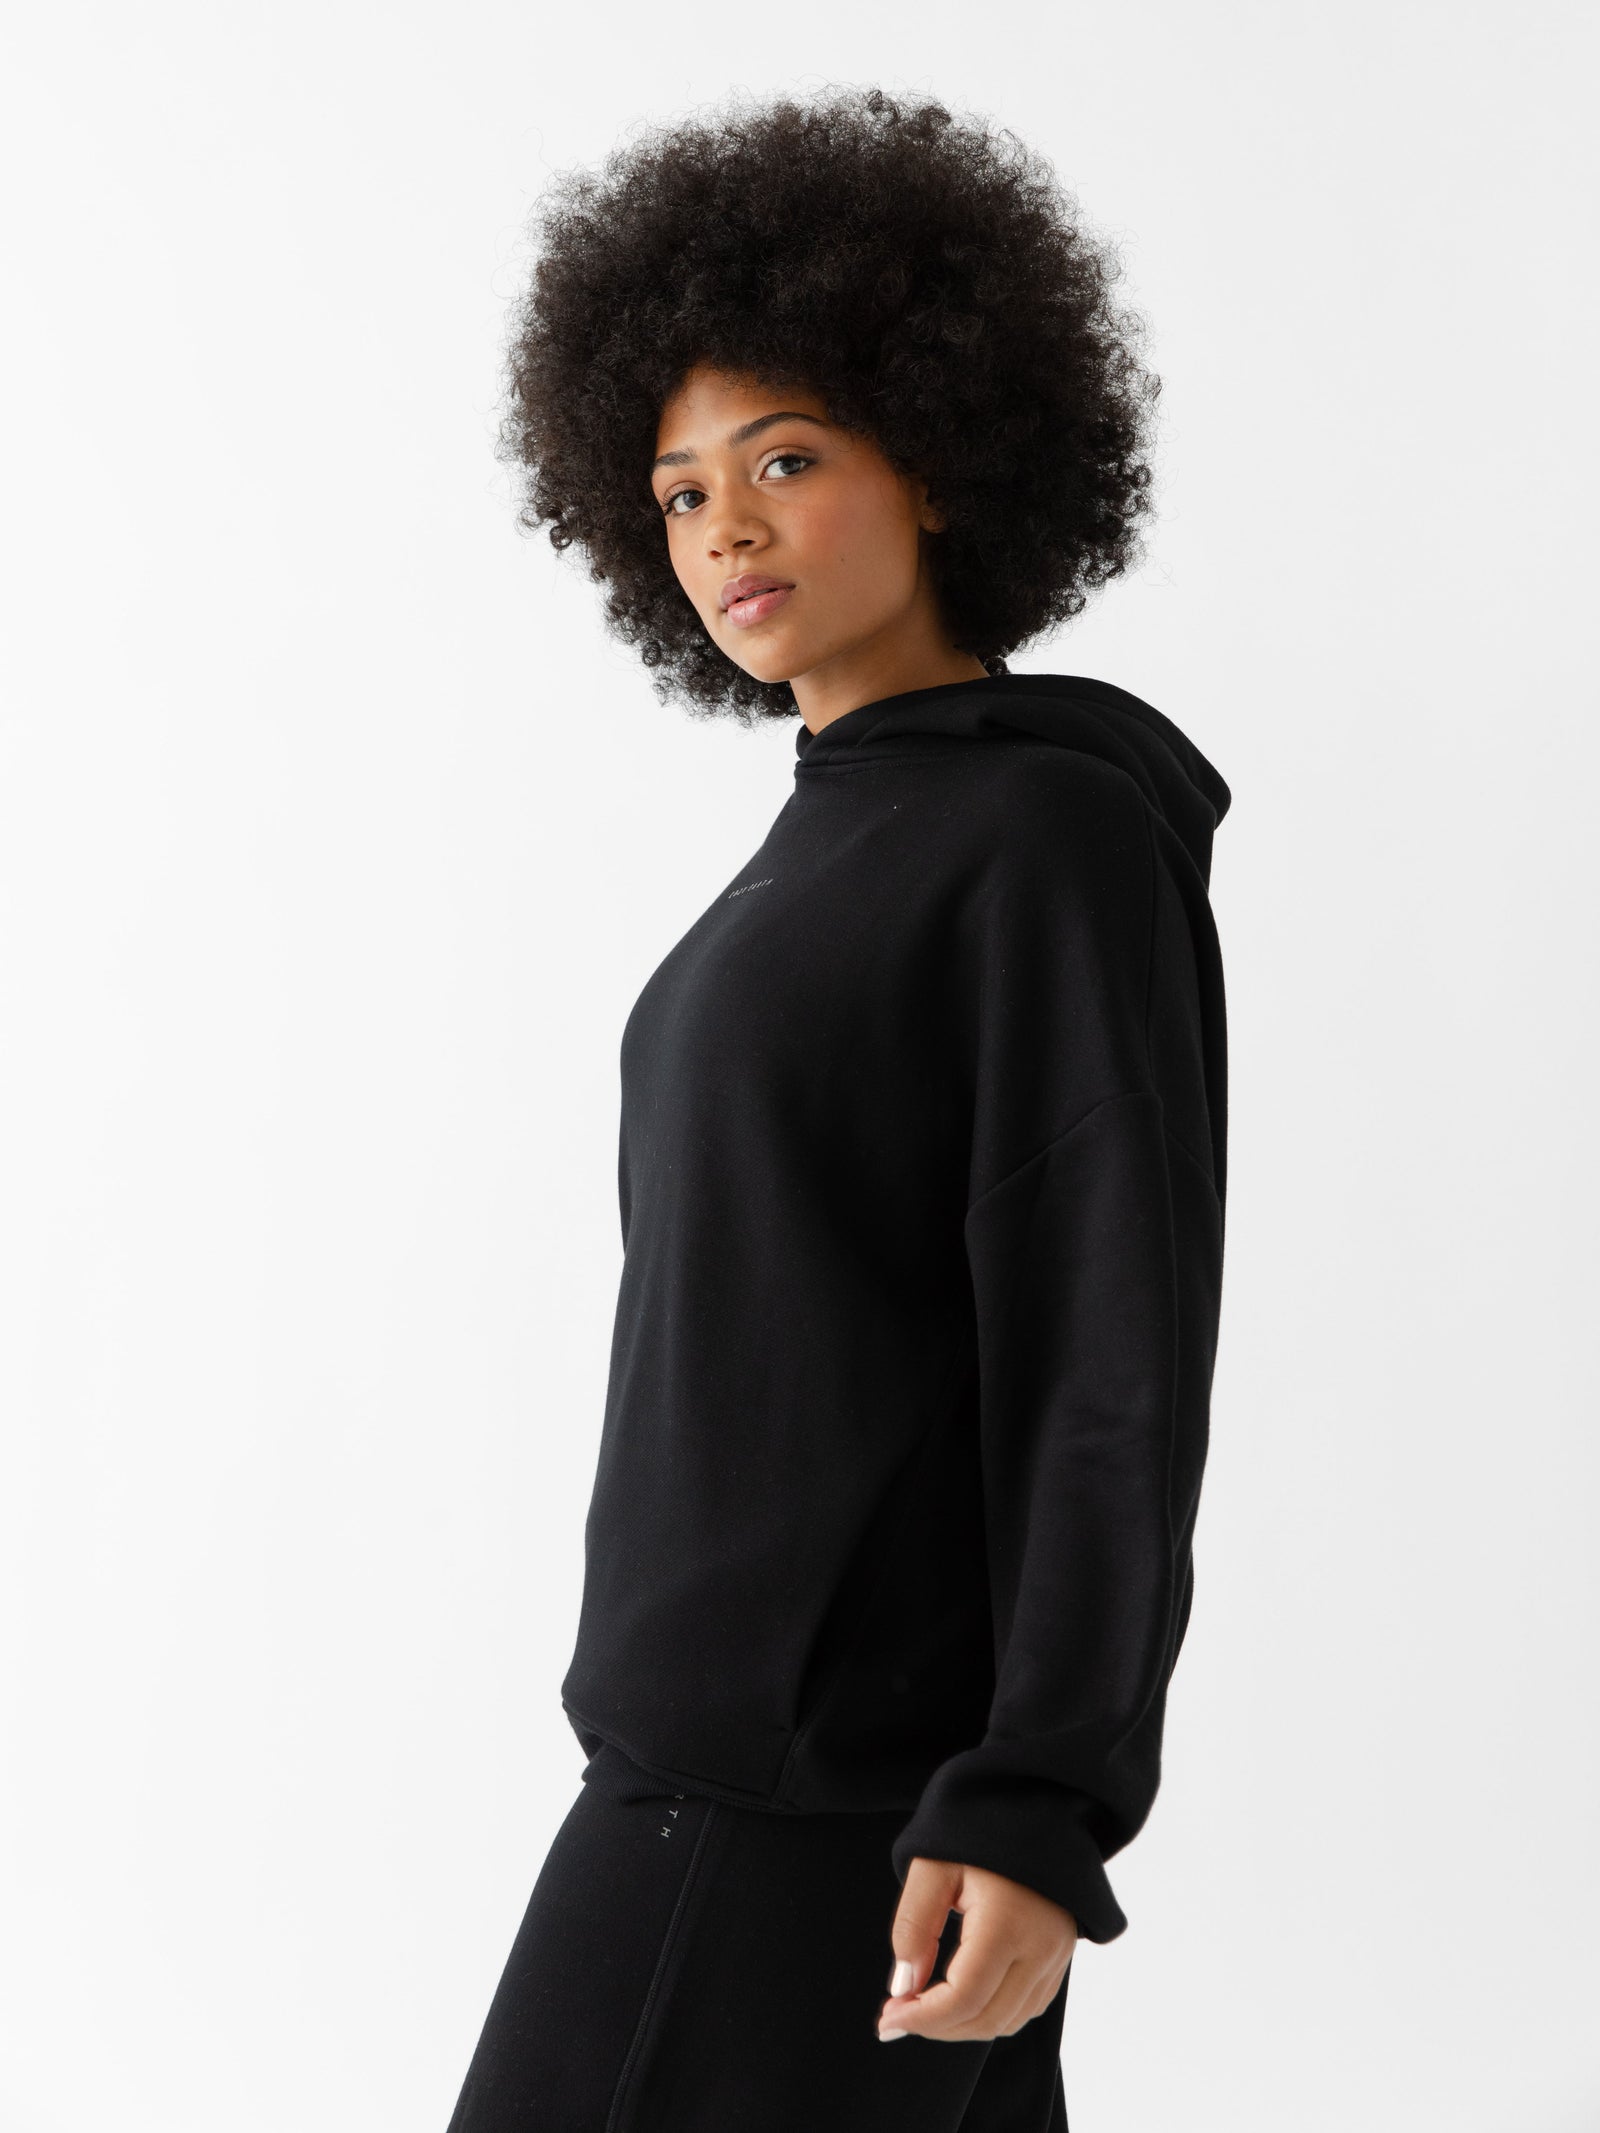 Woman wearing black cityscape hoodie with white background 